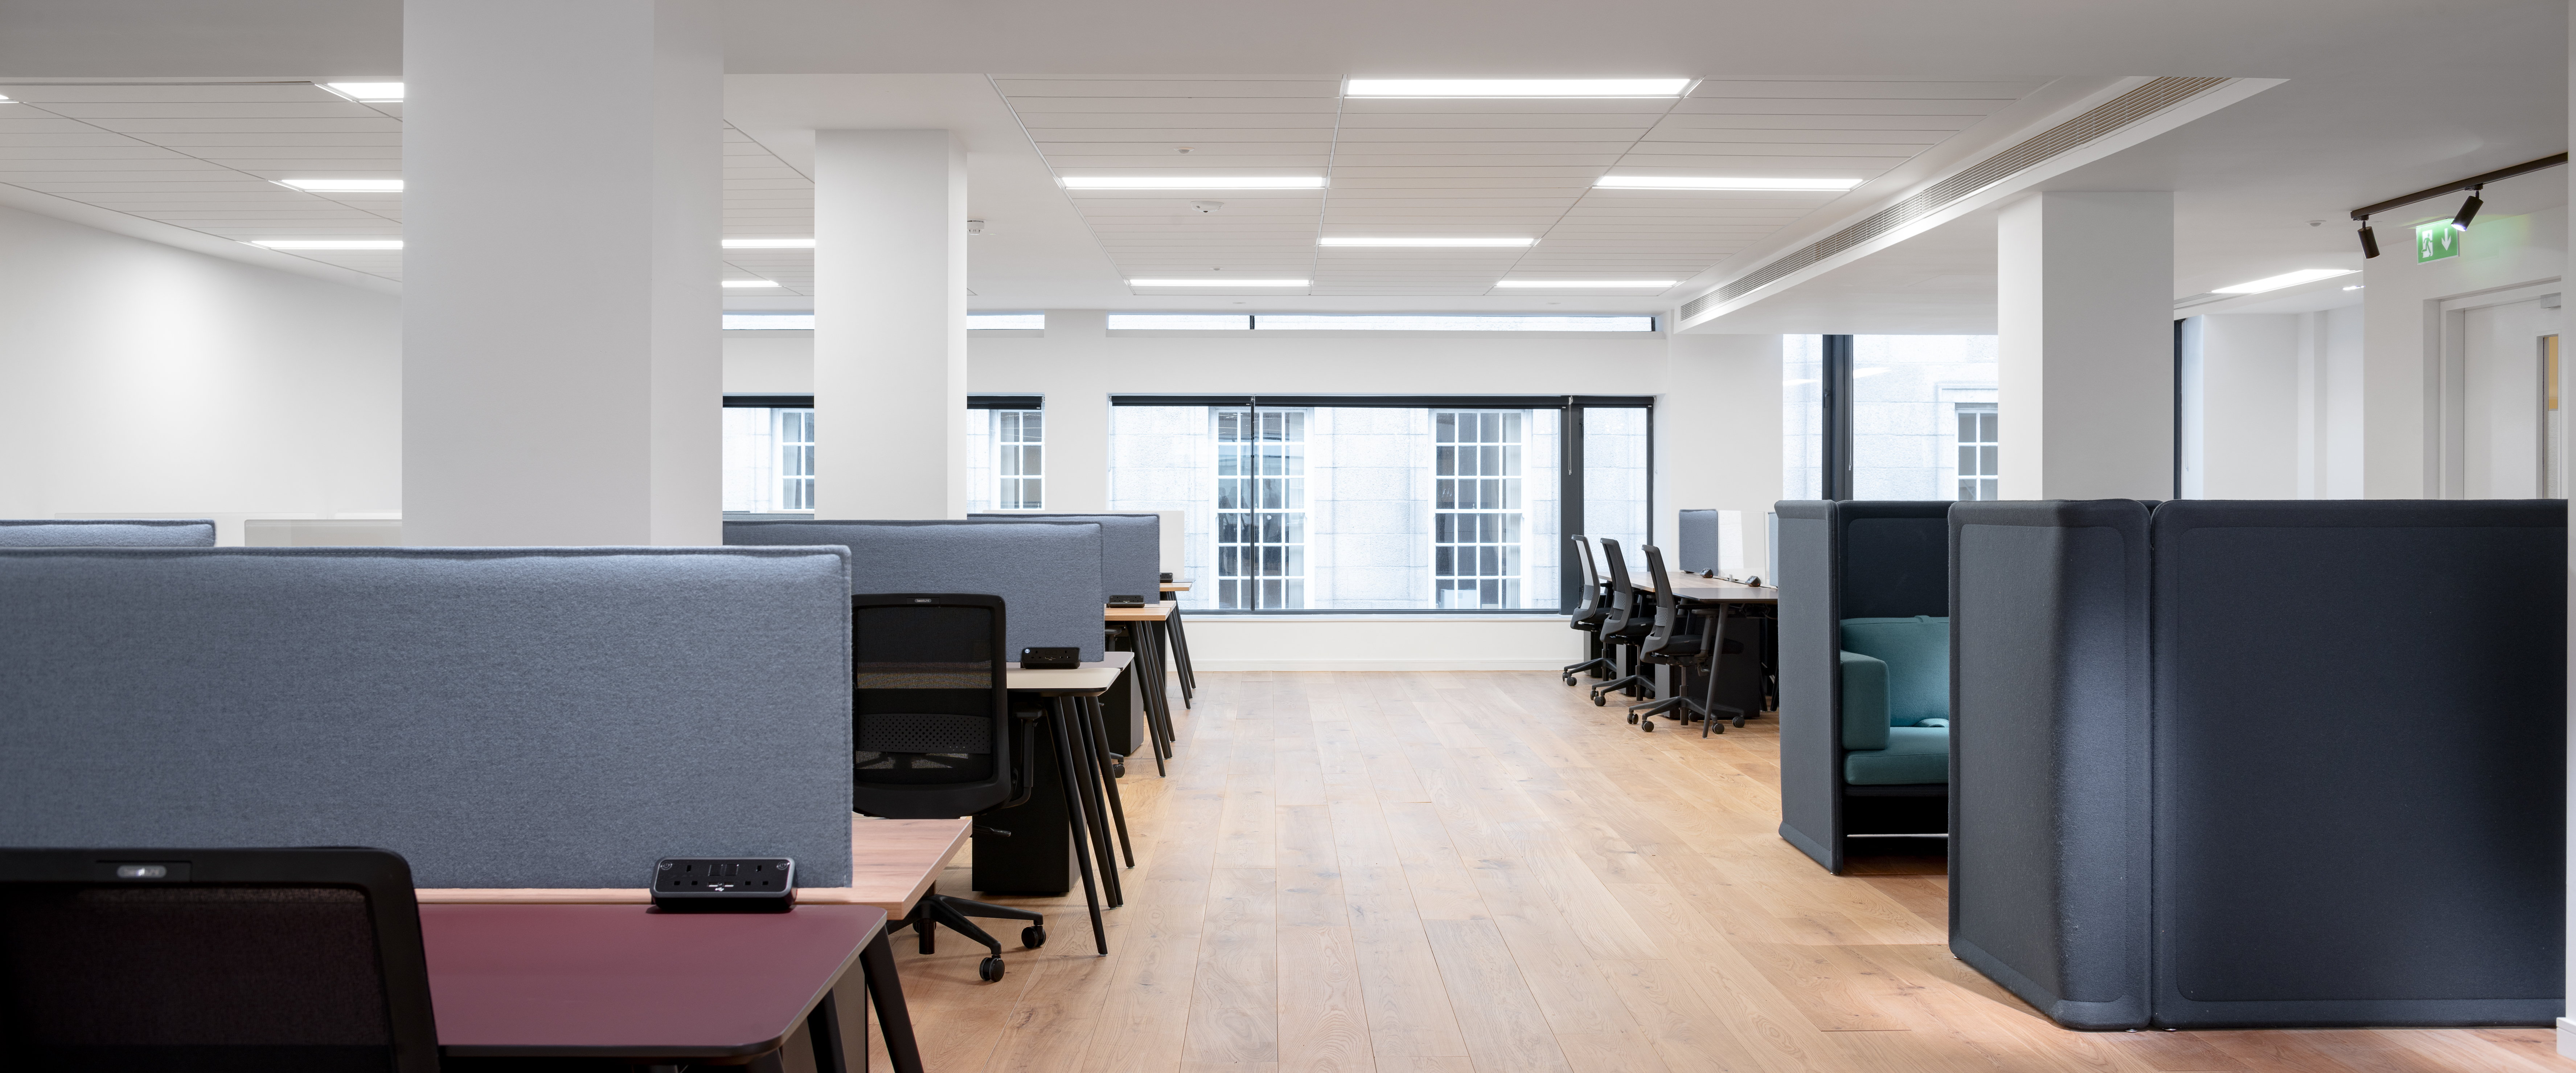 professional coworking office space in London and Dublin ©donalmurphyphoto